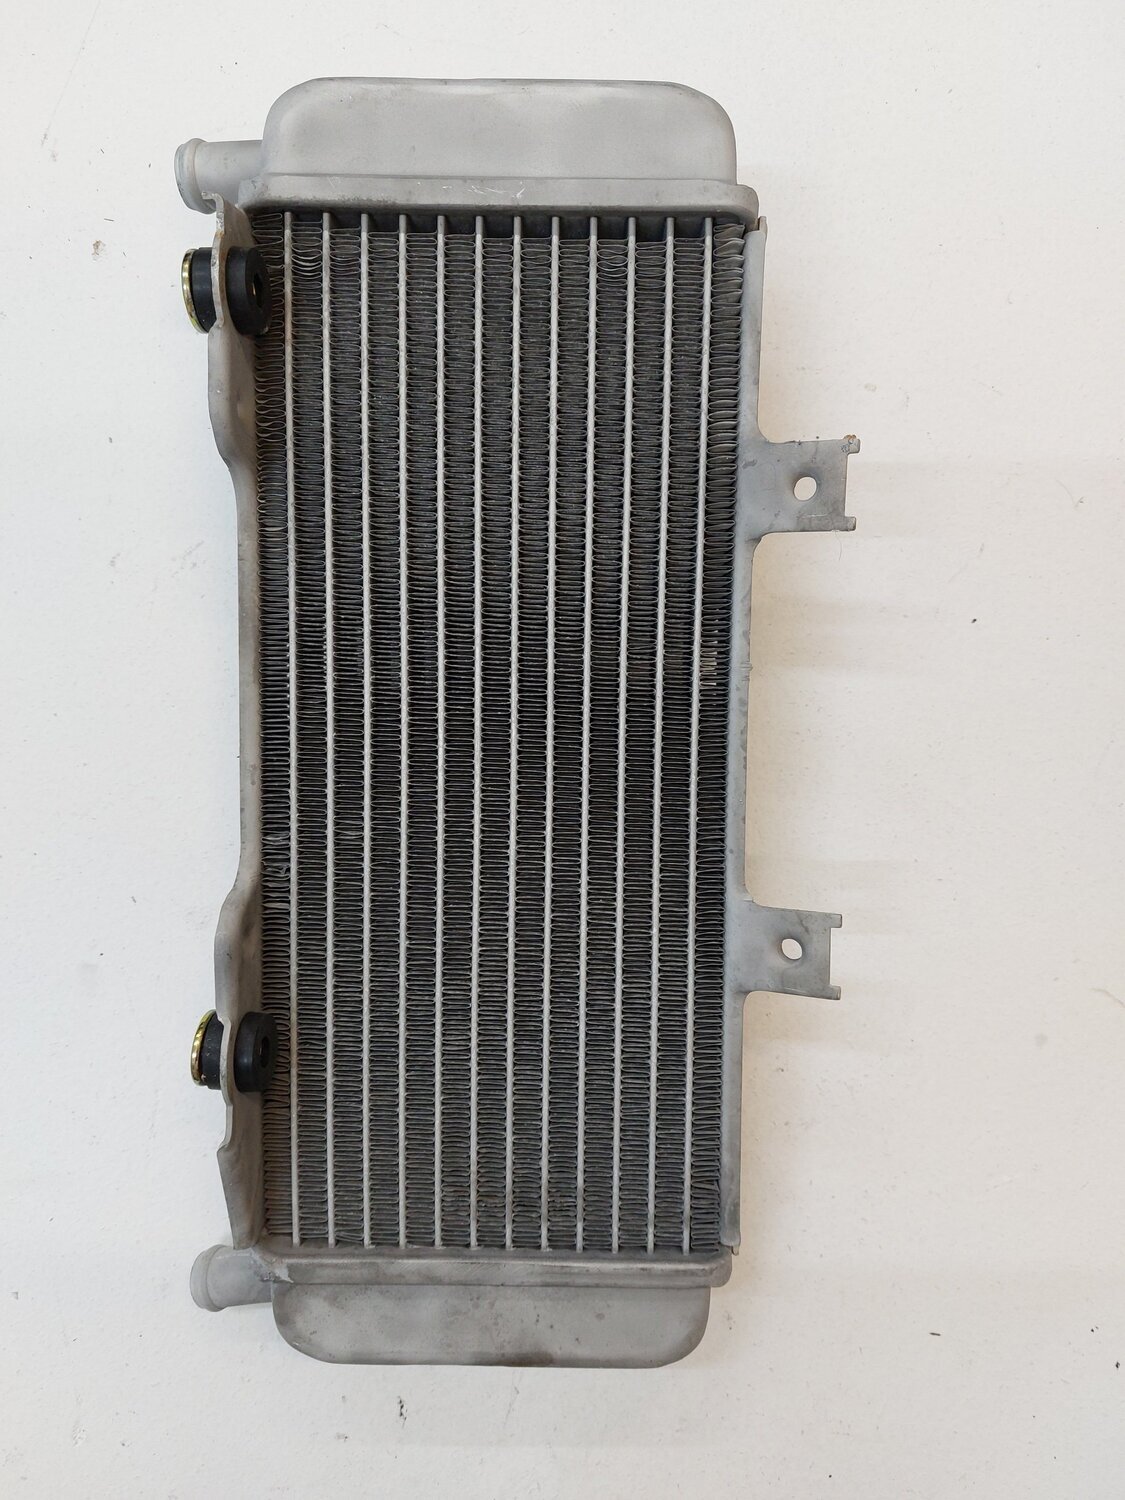 VX220 SUPERCHARGER REAR MOUNTED CHARGECOOLER RADIATOR